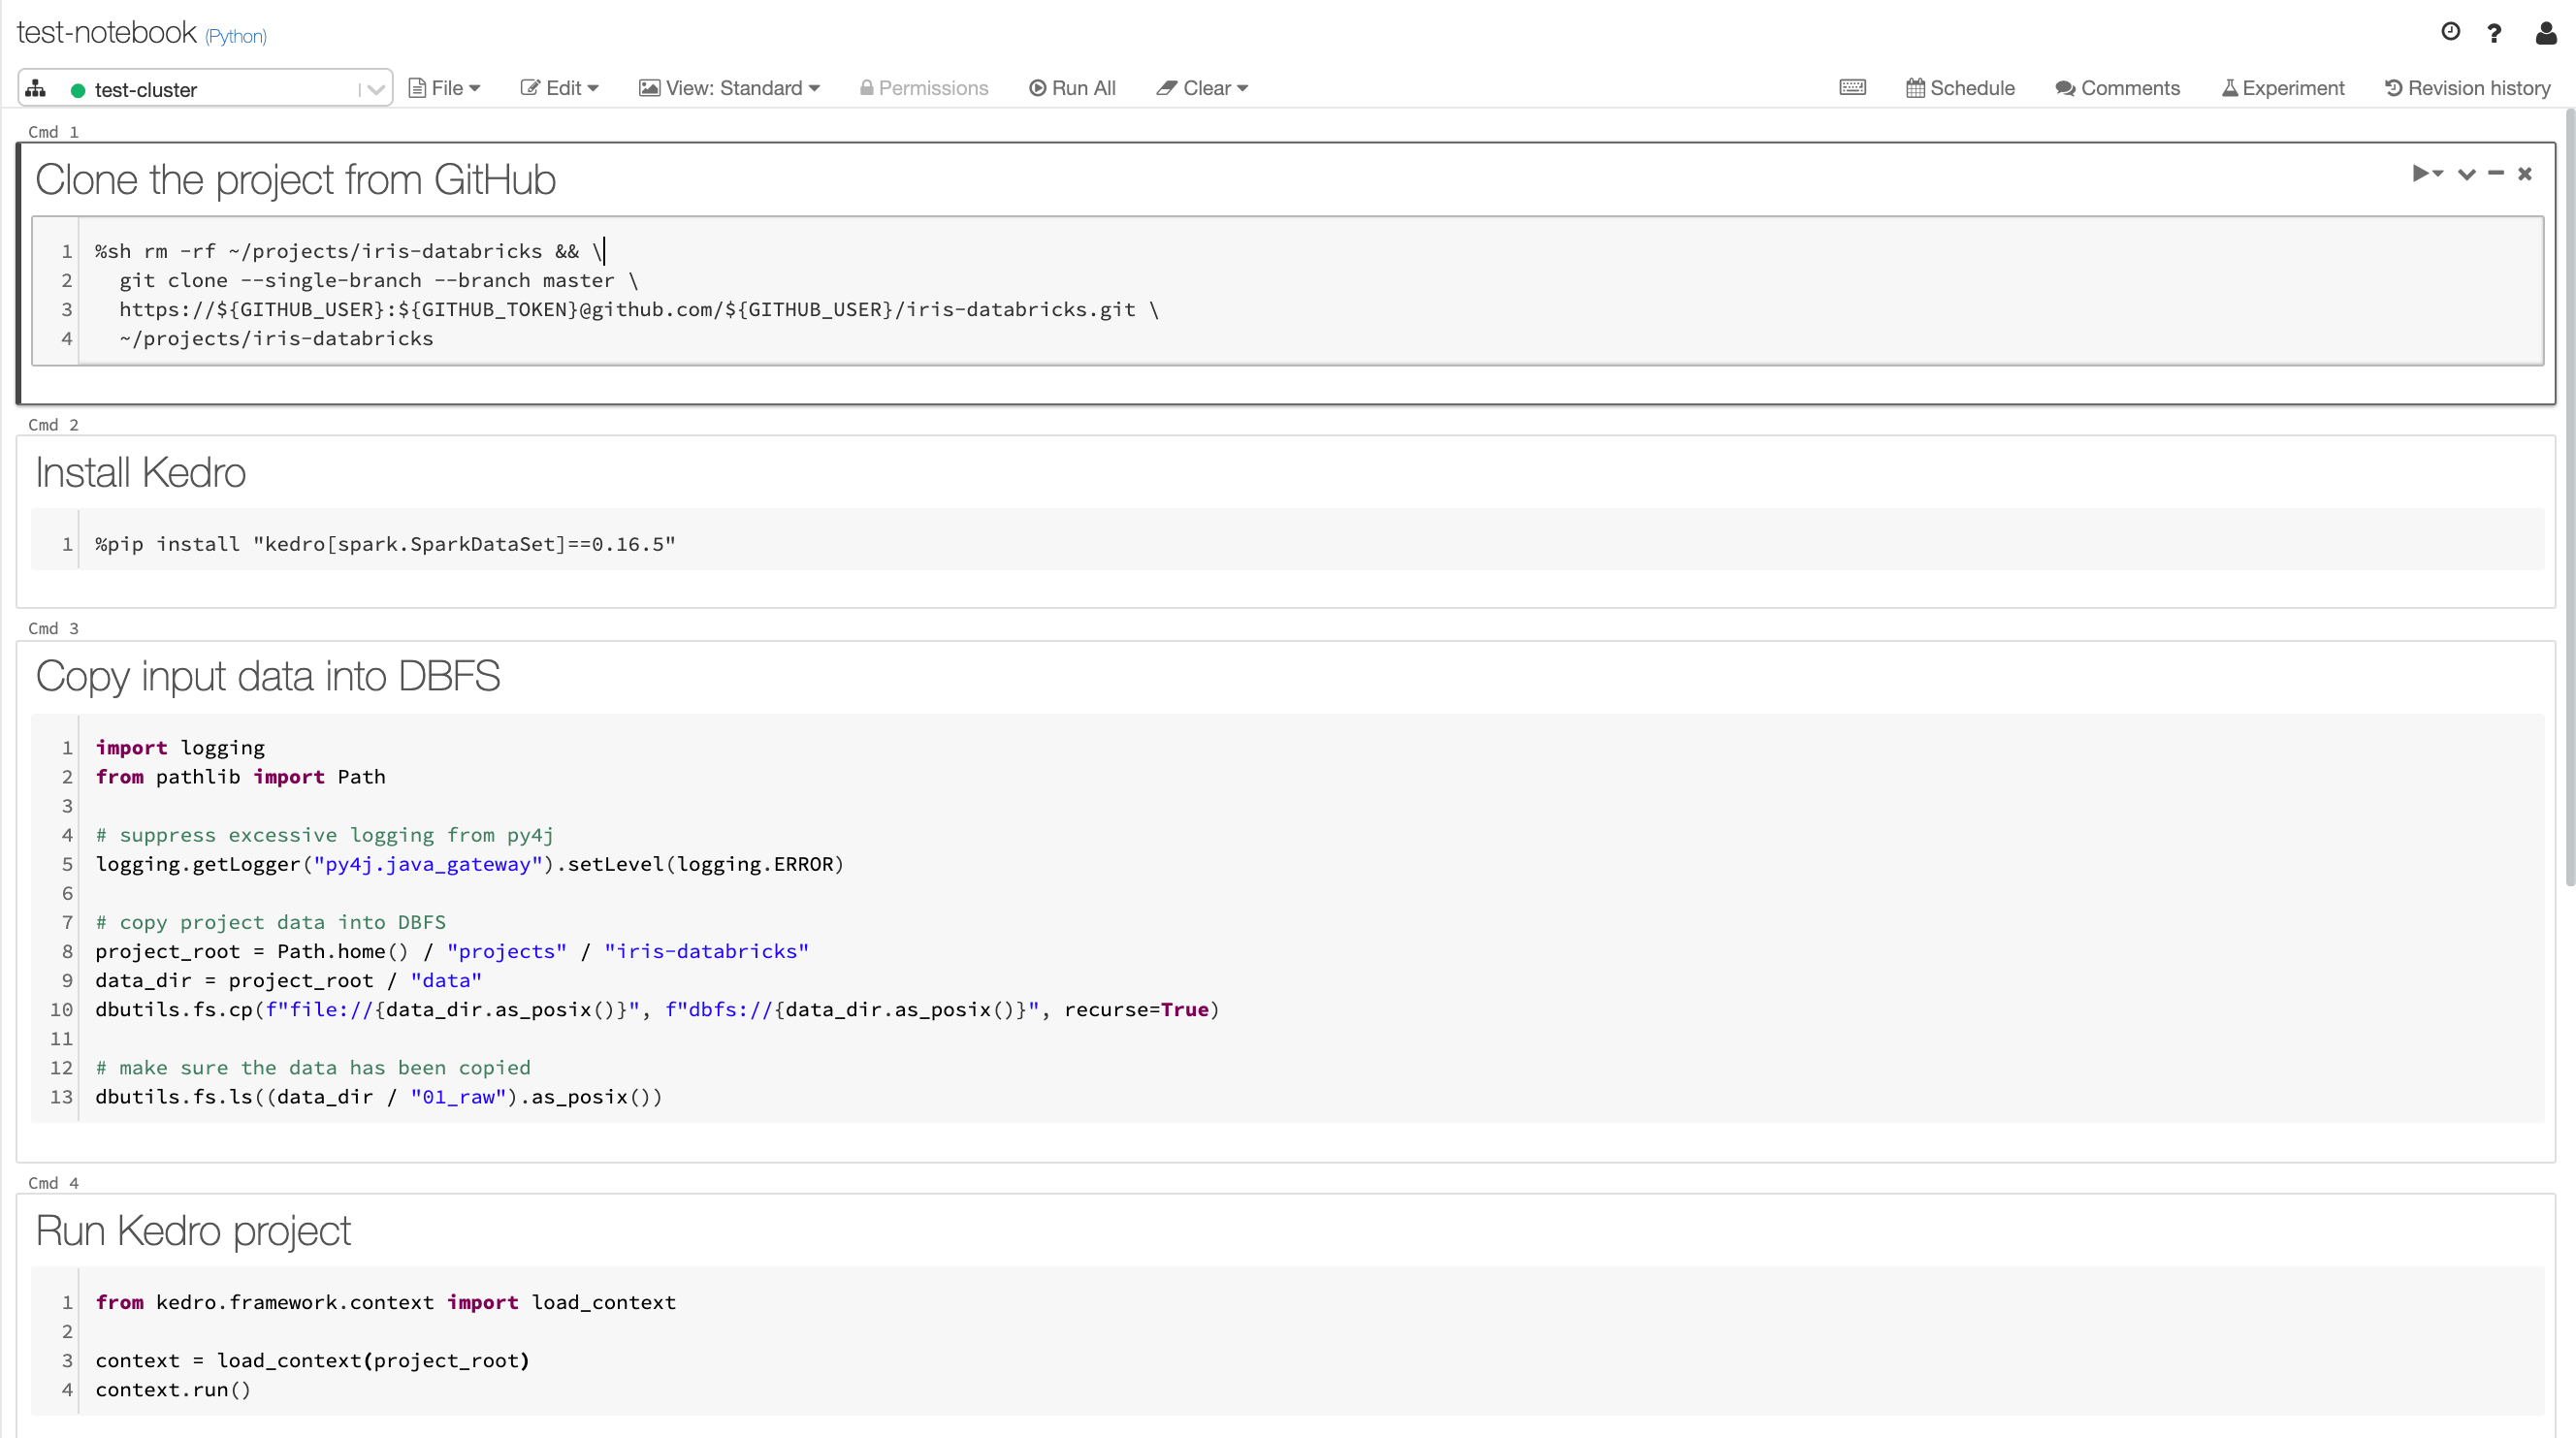 ../_images/databricks_notebook_example.png